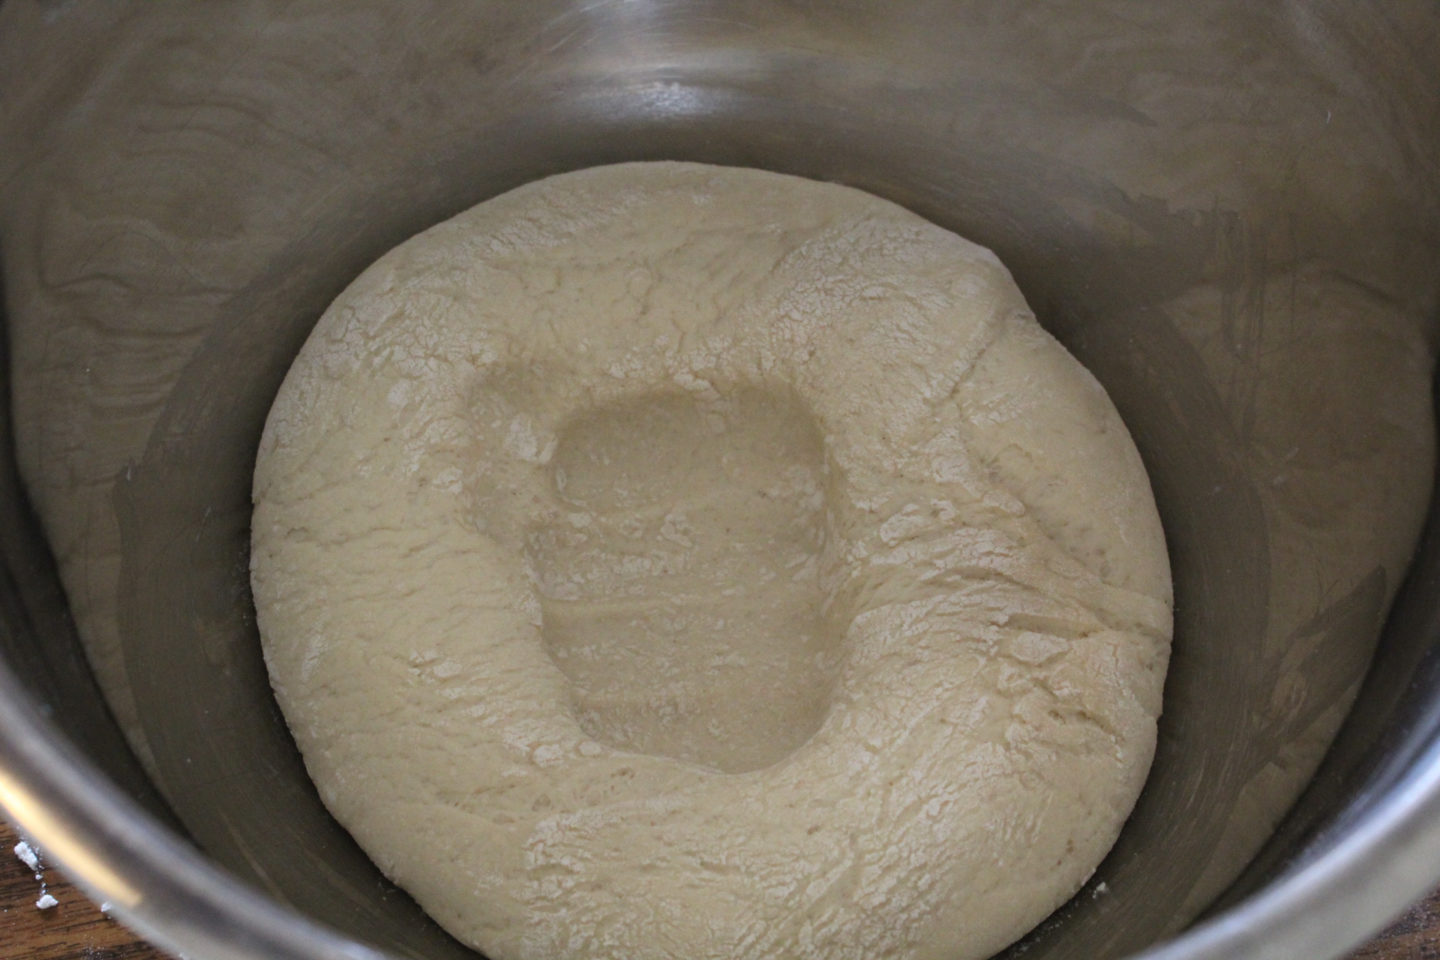 punch the dough to get the air out of the dough